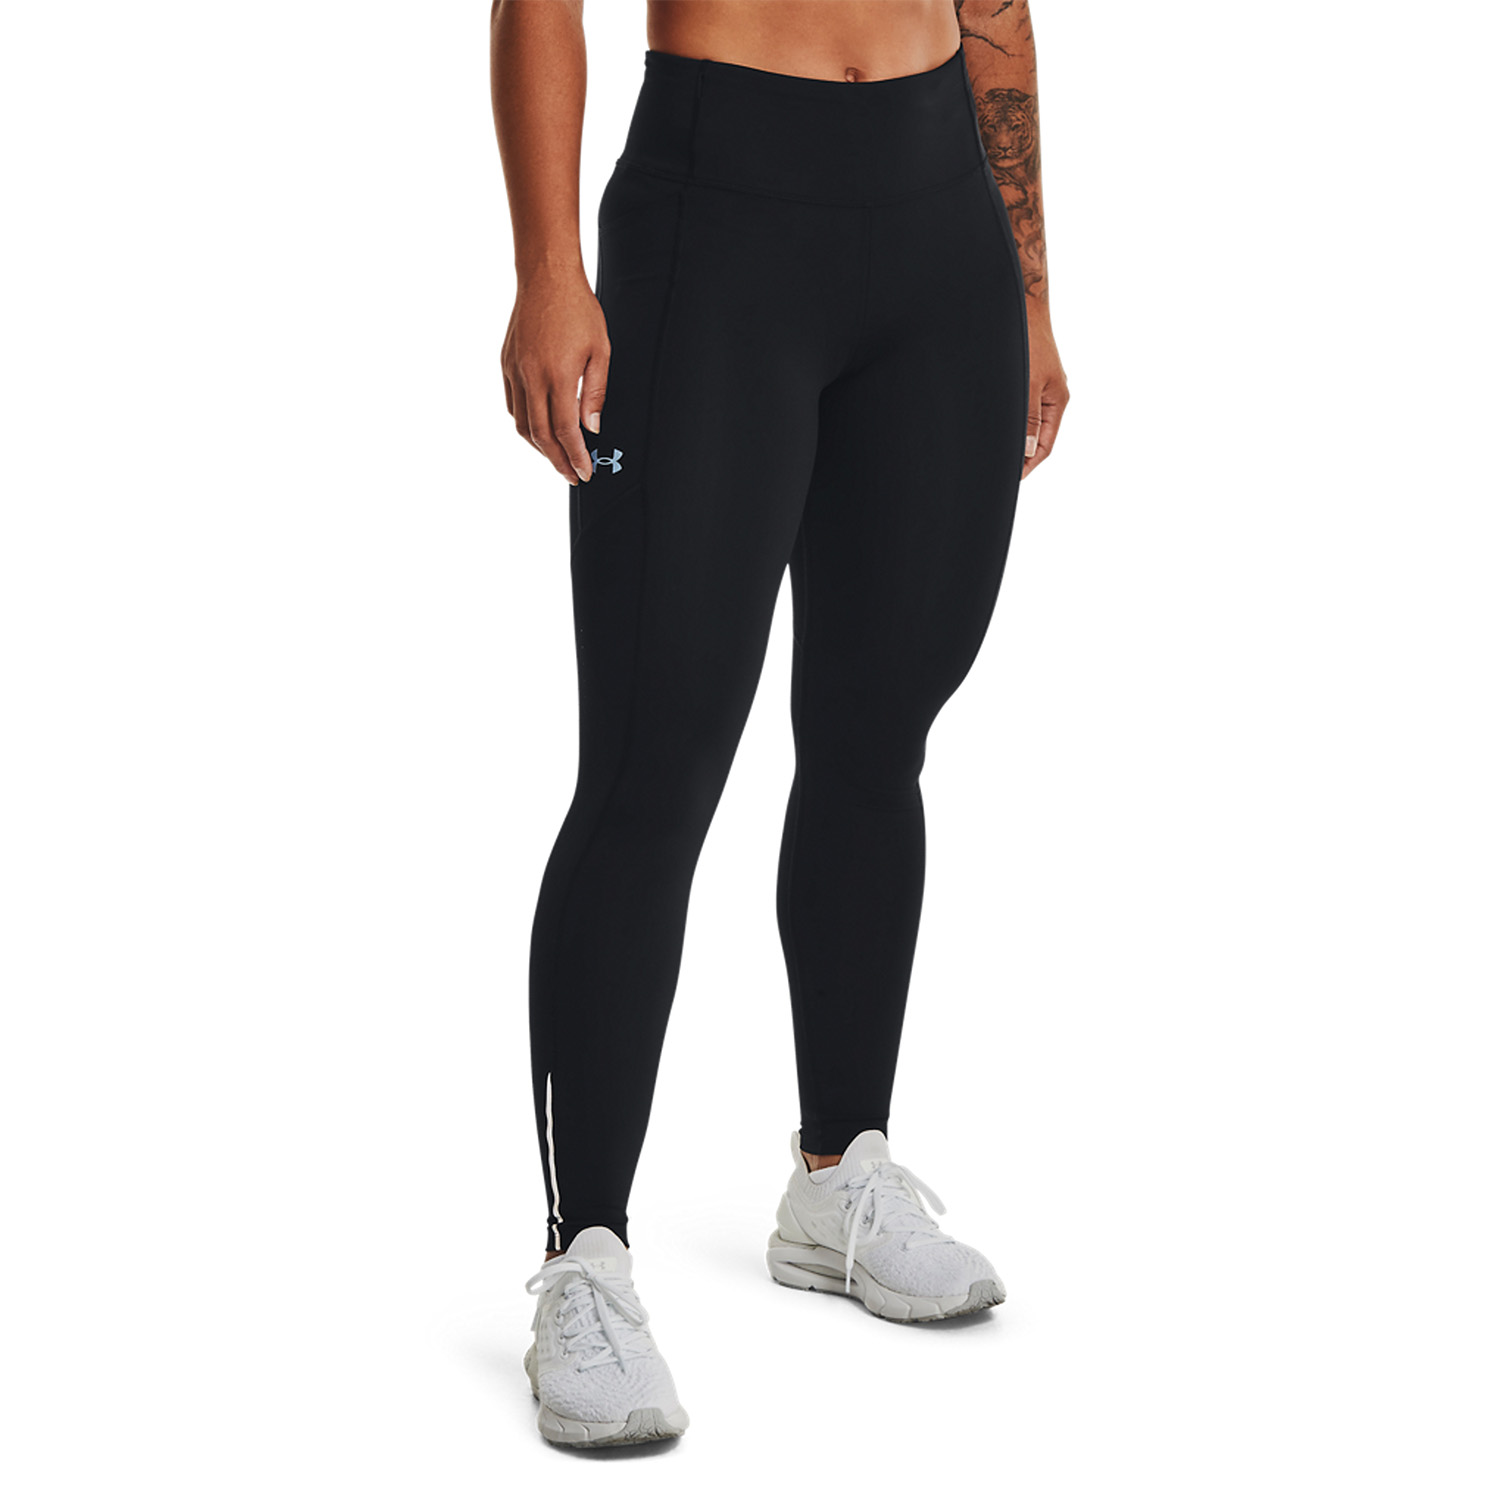 Under Armour Fly Fast 3.0 Women's Running Tights - Black